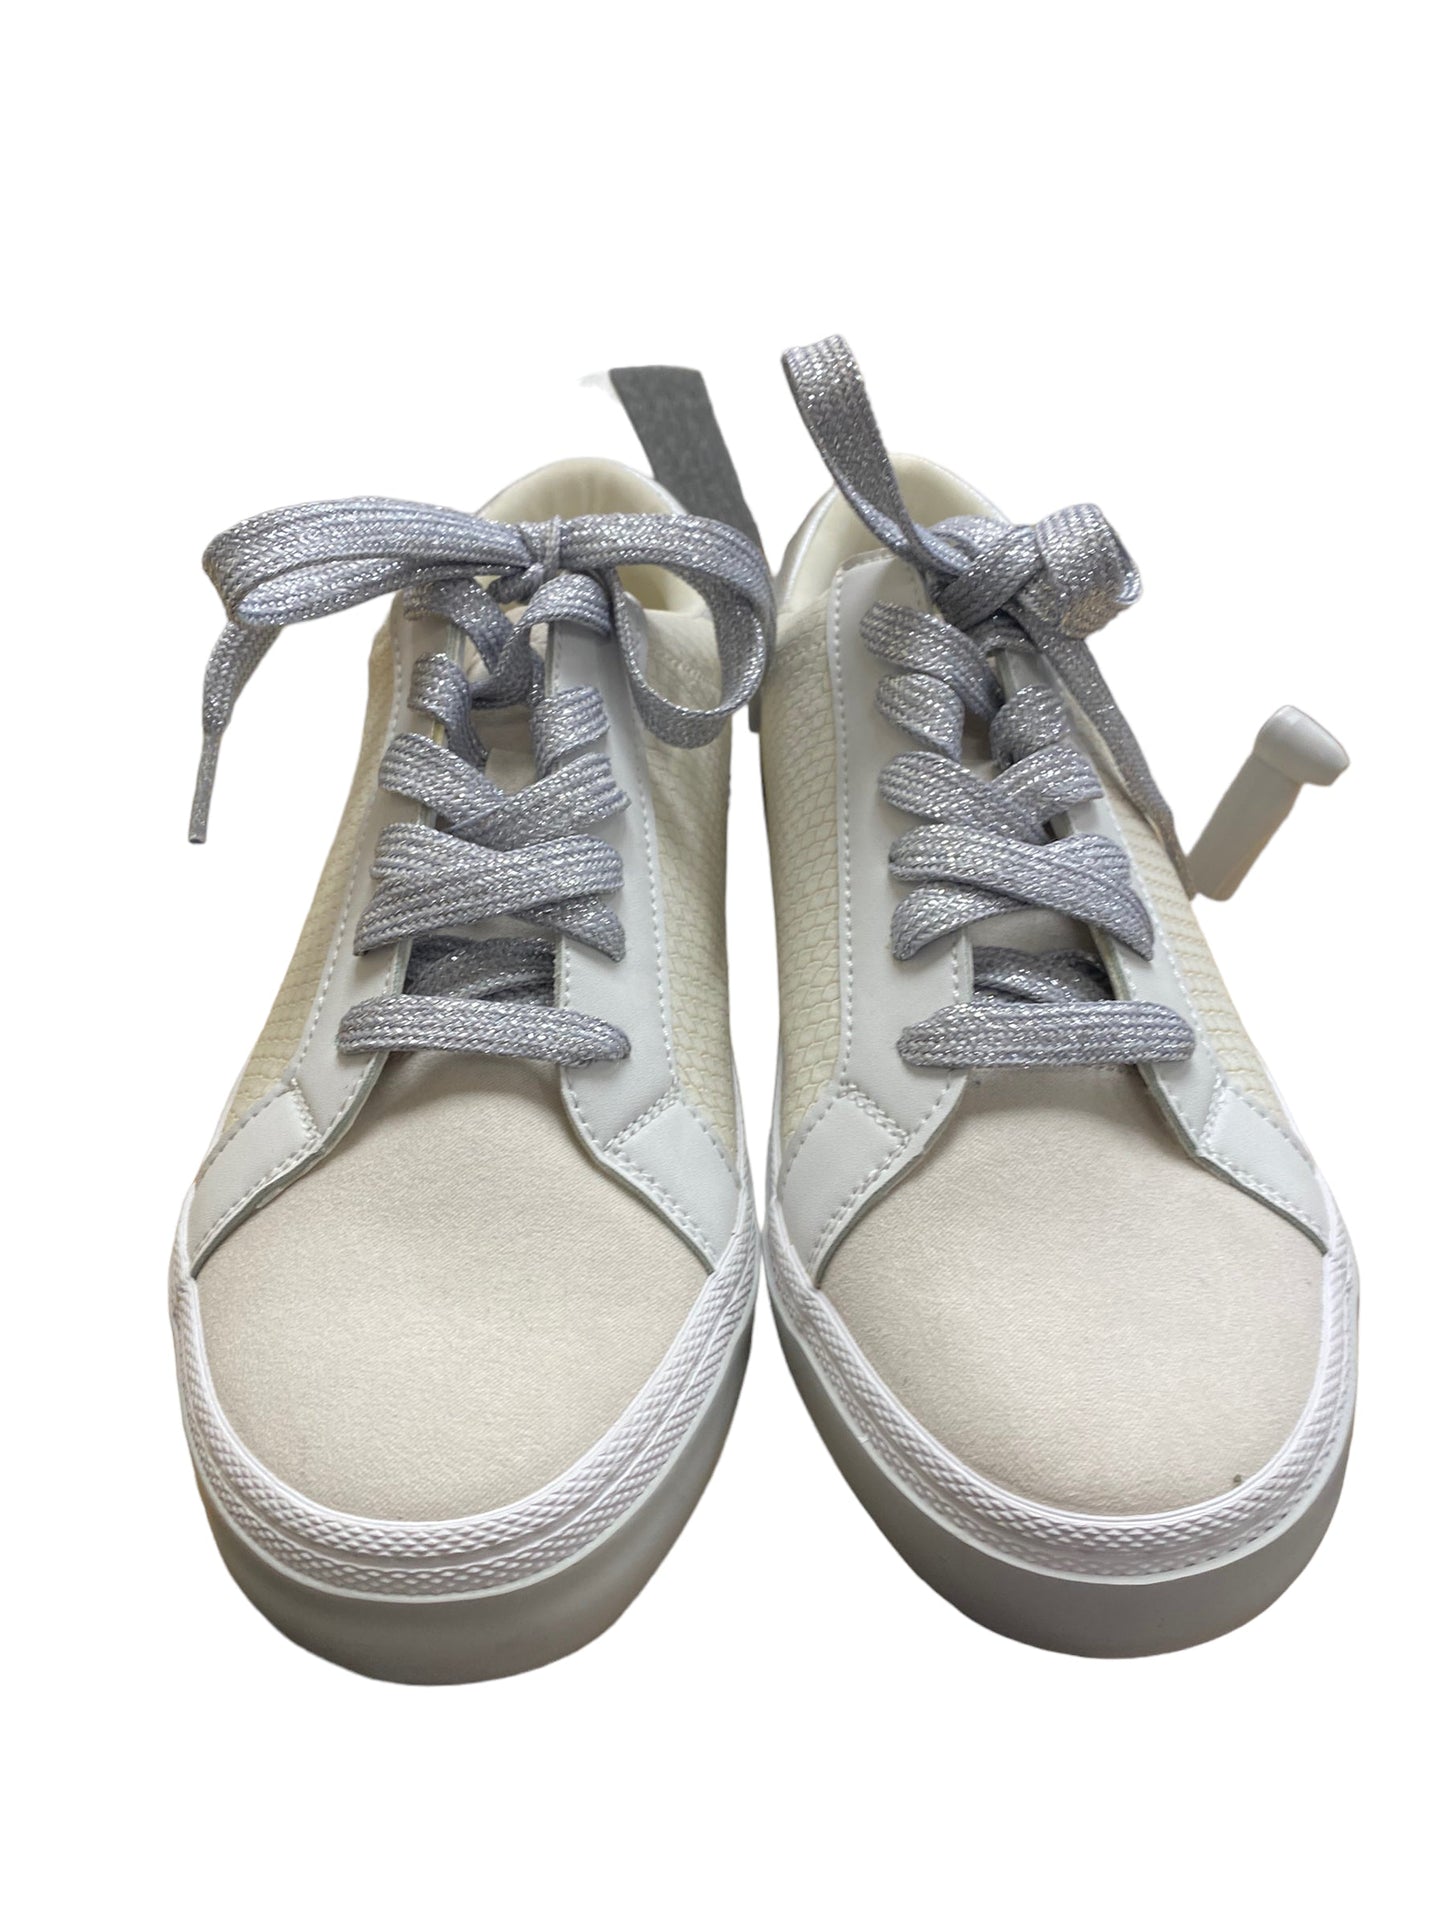 Shoes Sneakers By A New Day  Size: 9